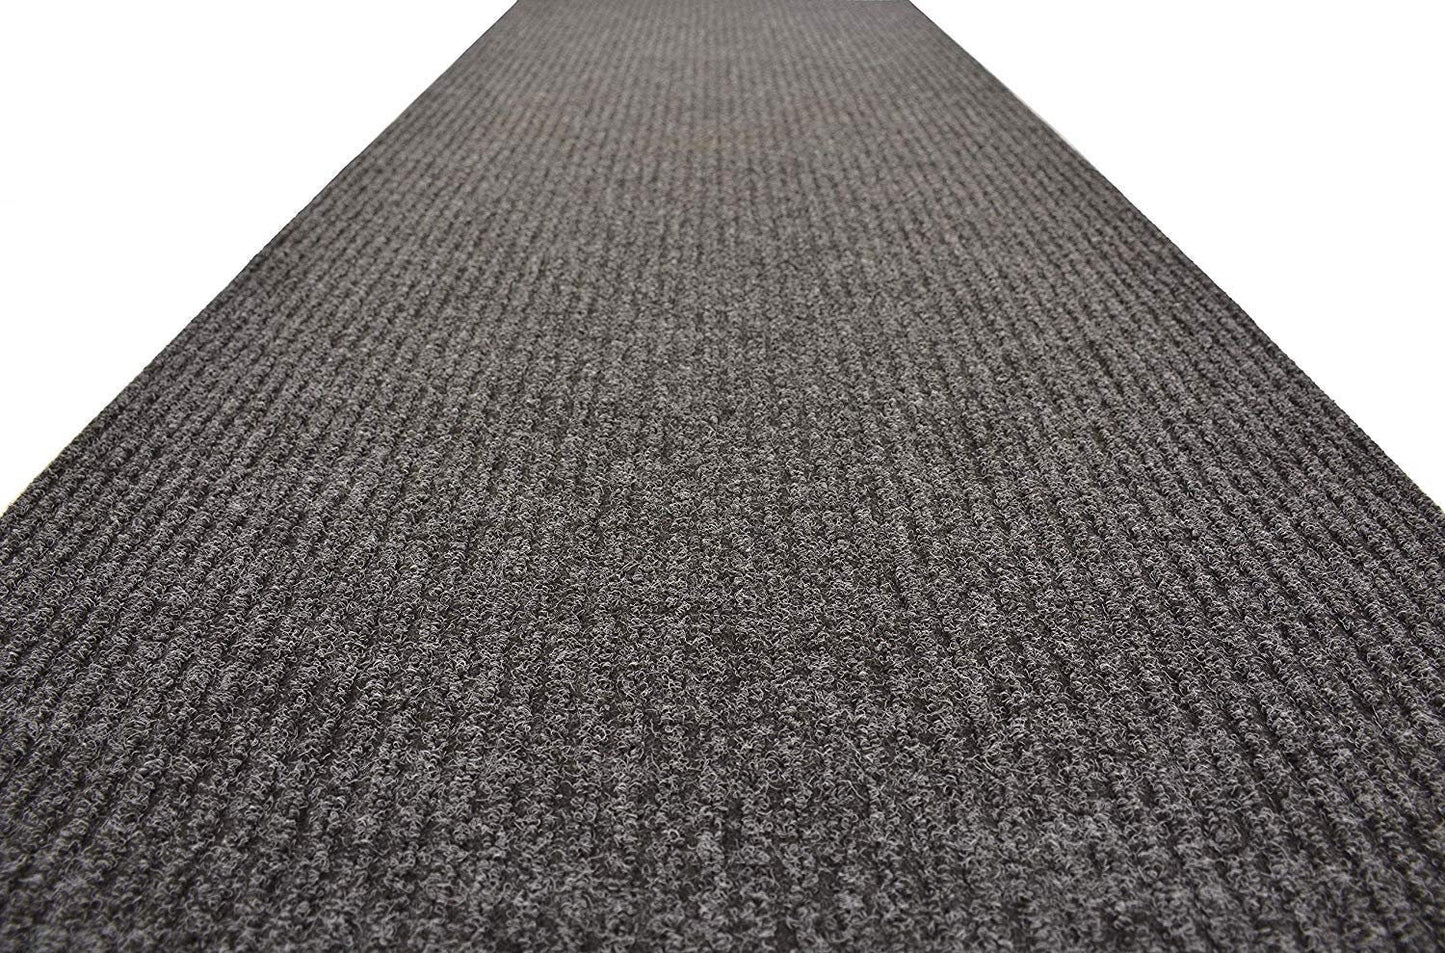 Custom Size Runner Rug Tough Collection Grey Skid Resistant Indoor / Outdoor Runner Rug Cut To Size Non Slip Runner Rug Customize By Feet